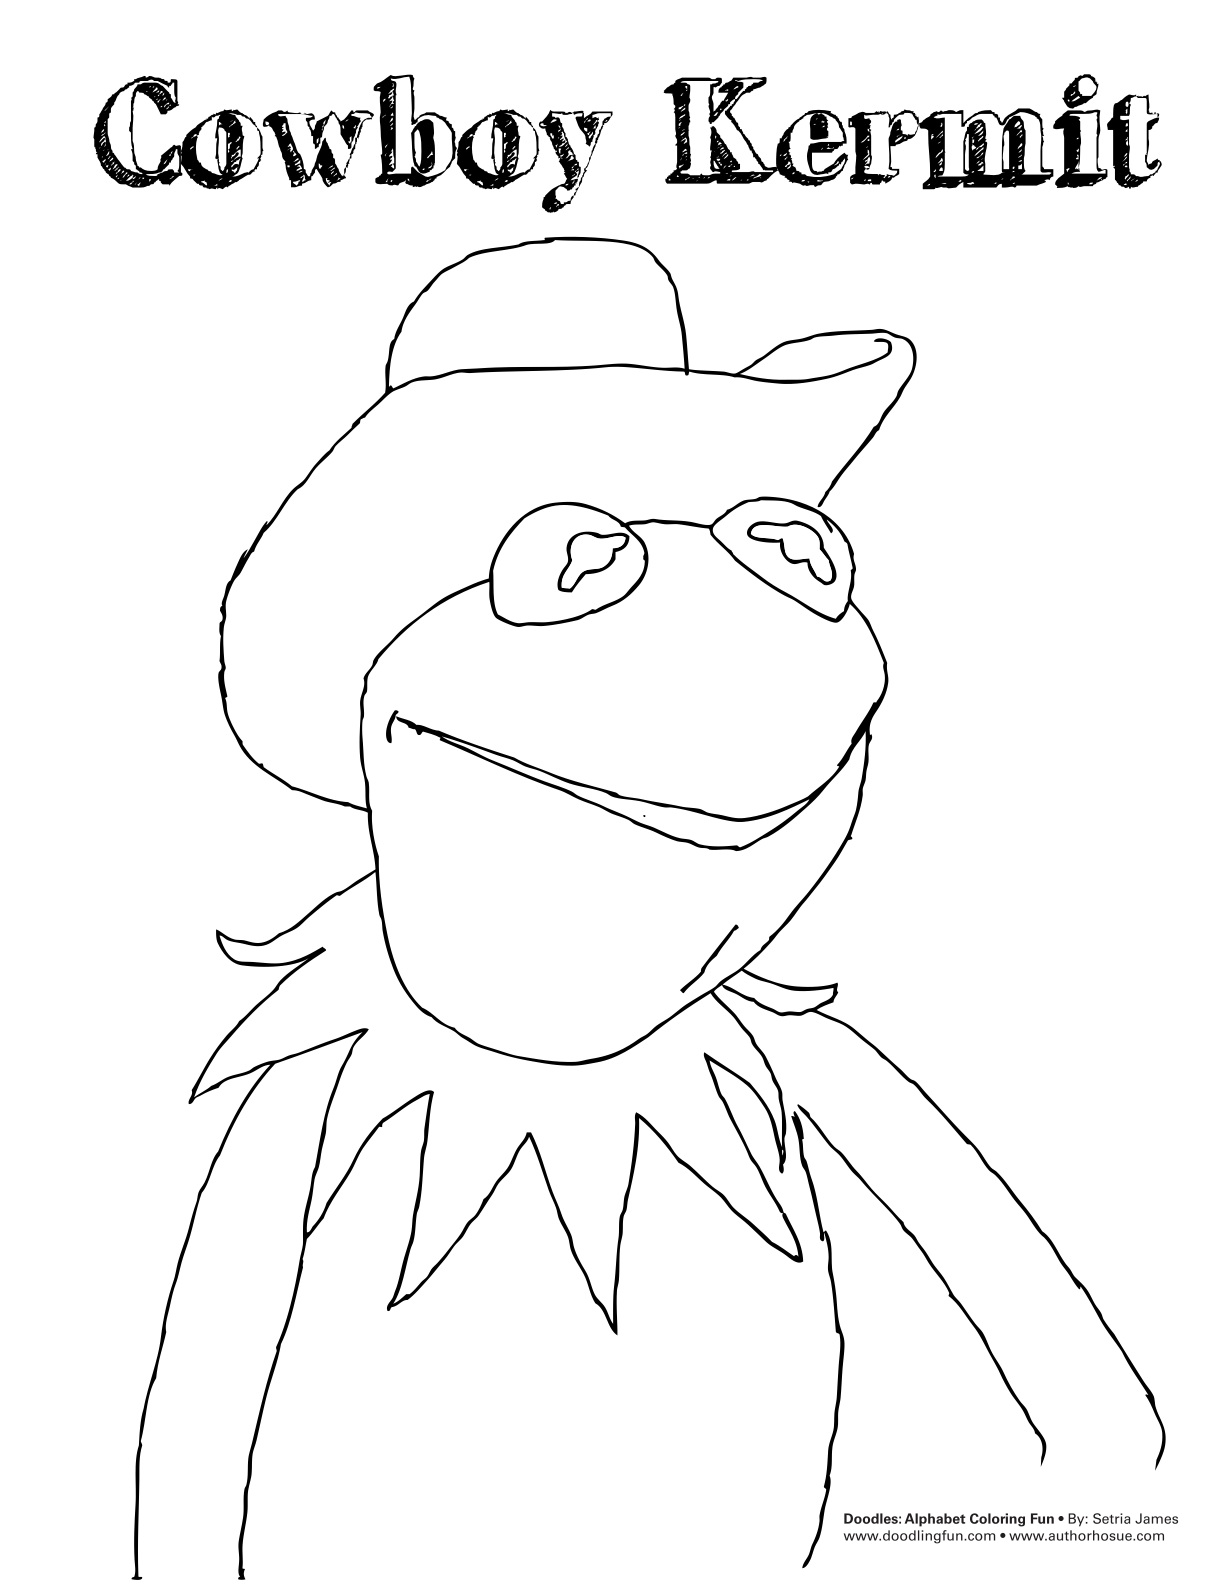 Kermit the frog coloring sheet doodles ave